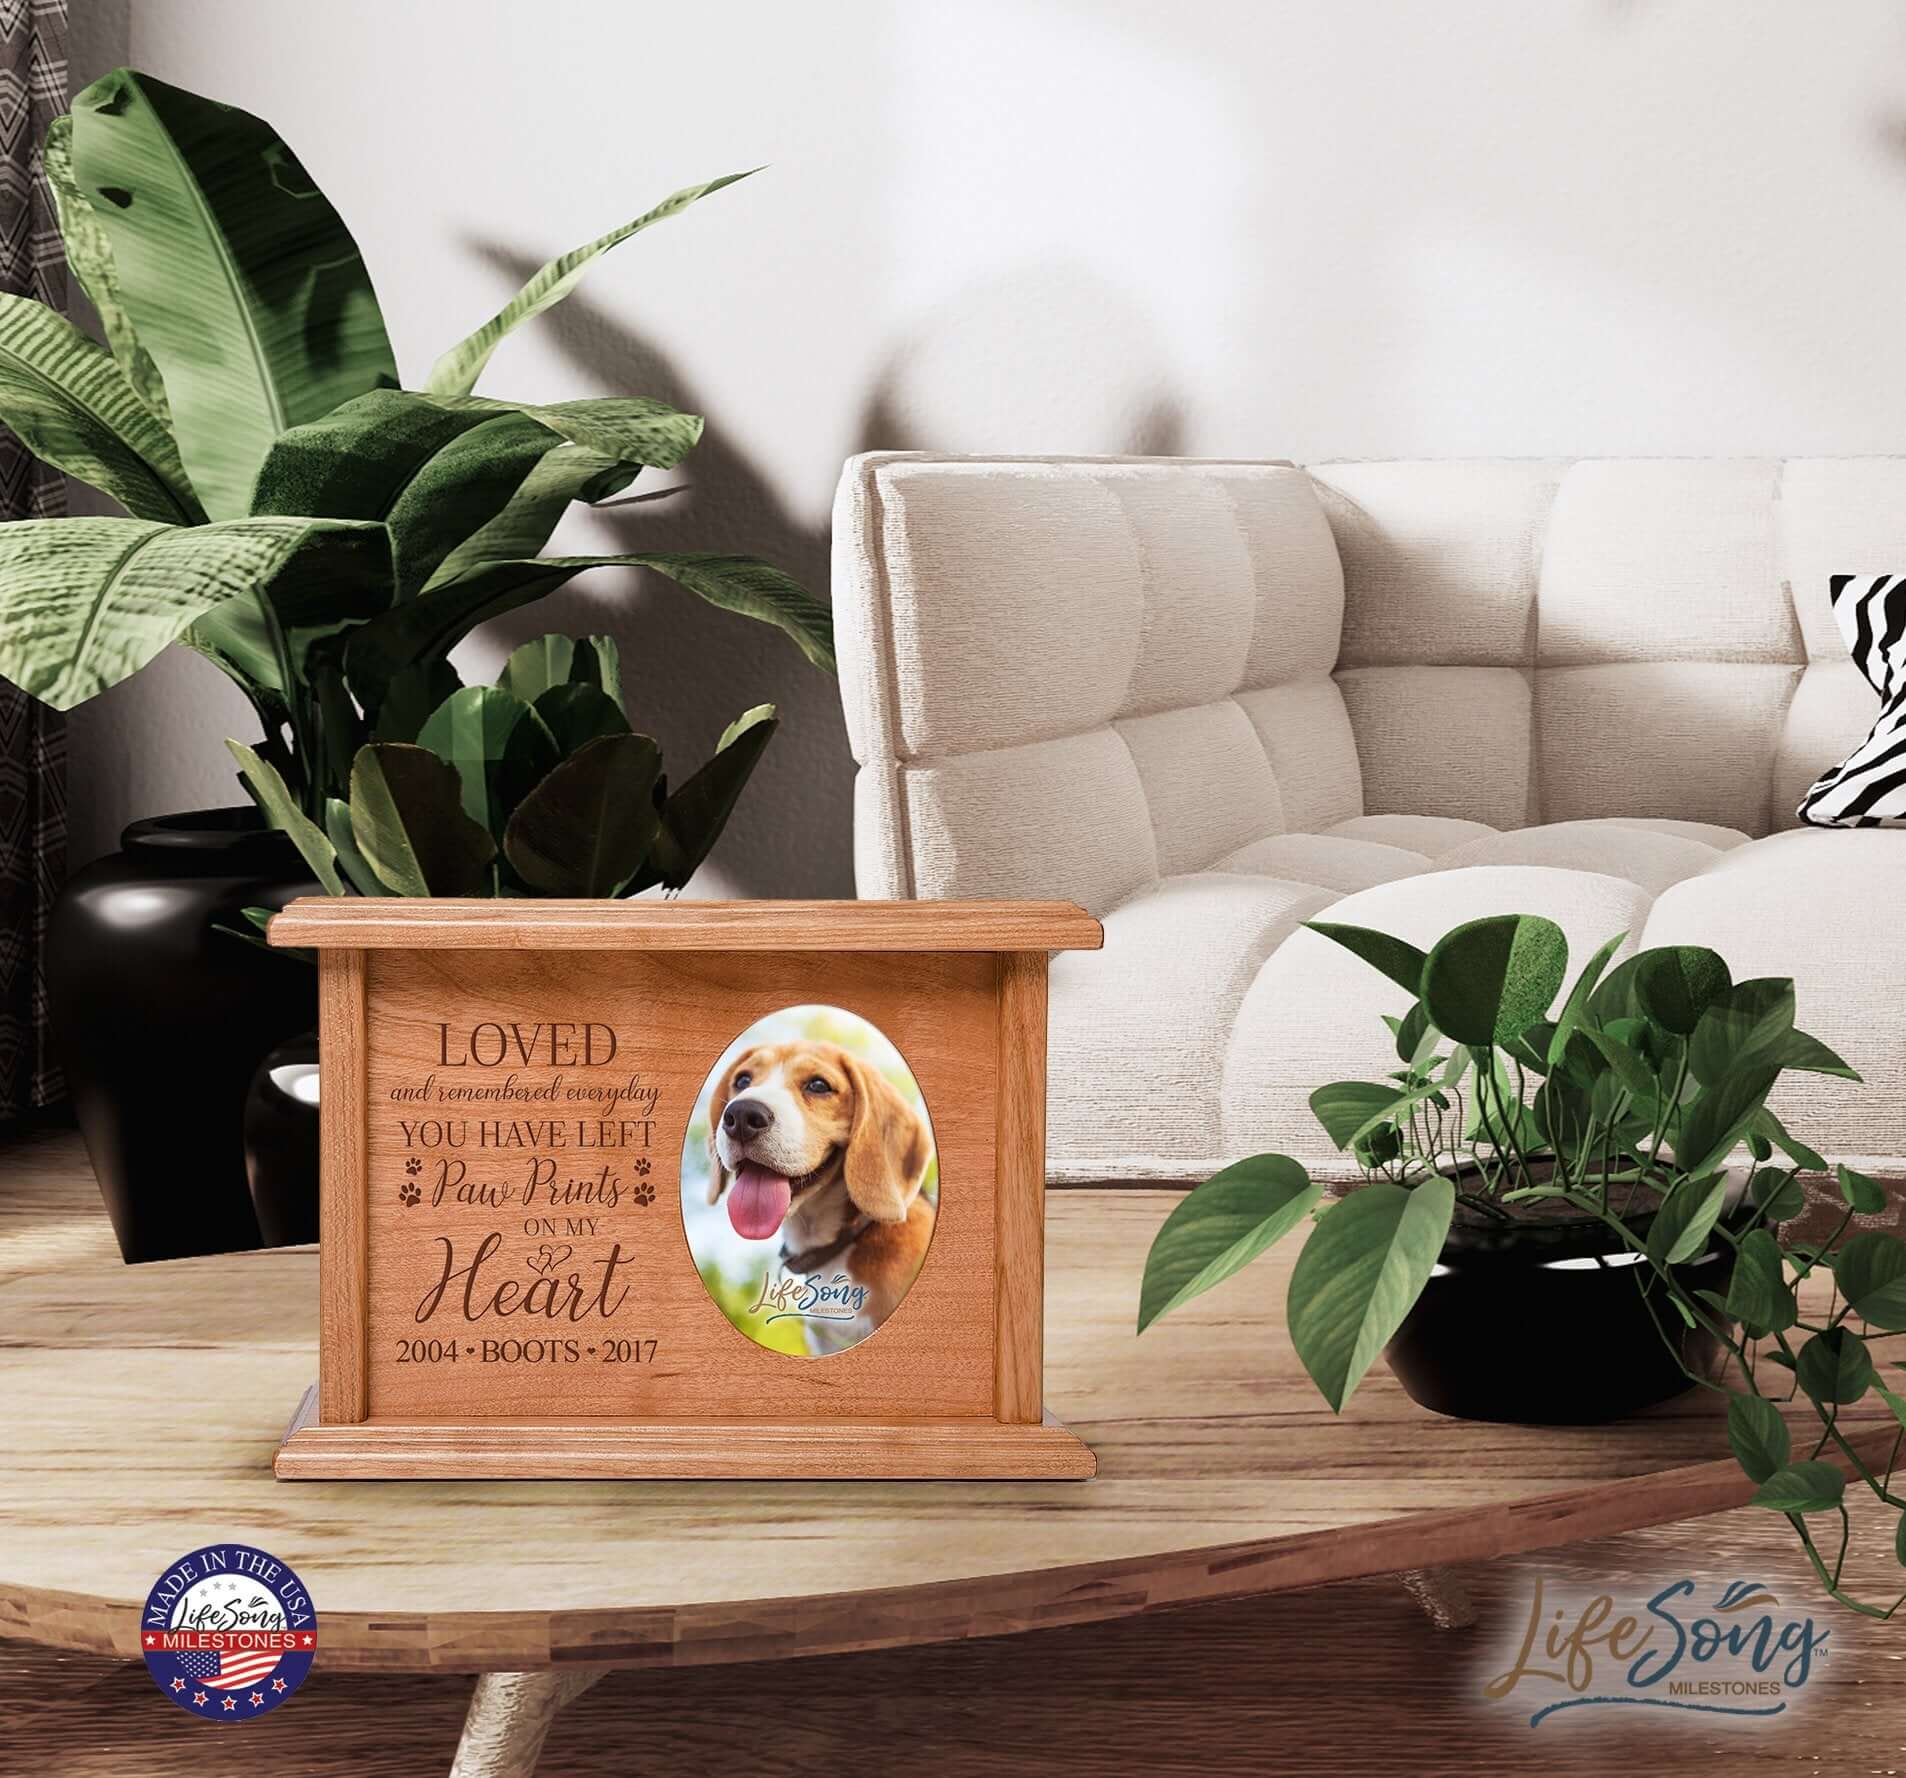 Pet Memorial Picture Cremation Urn Box for Dog or Cat - Loved and Remembered